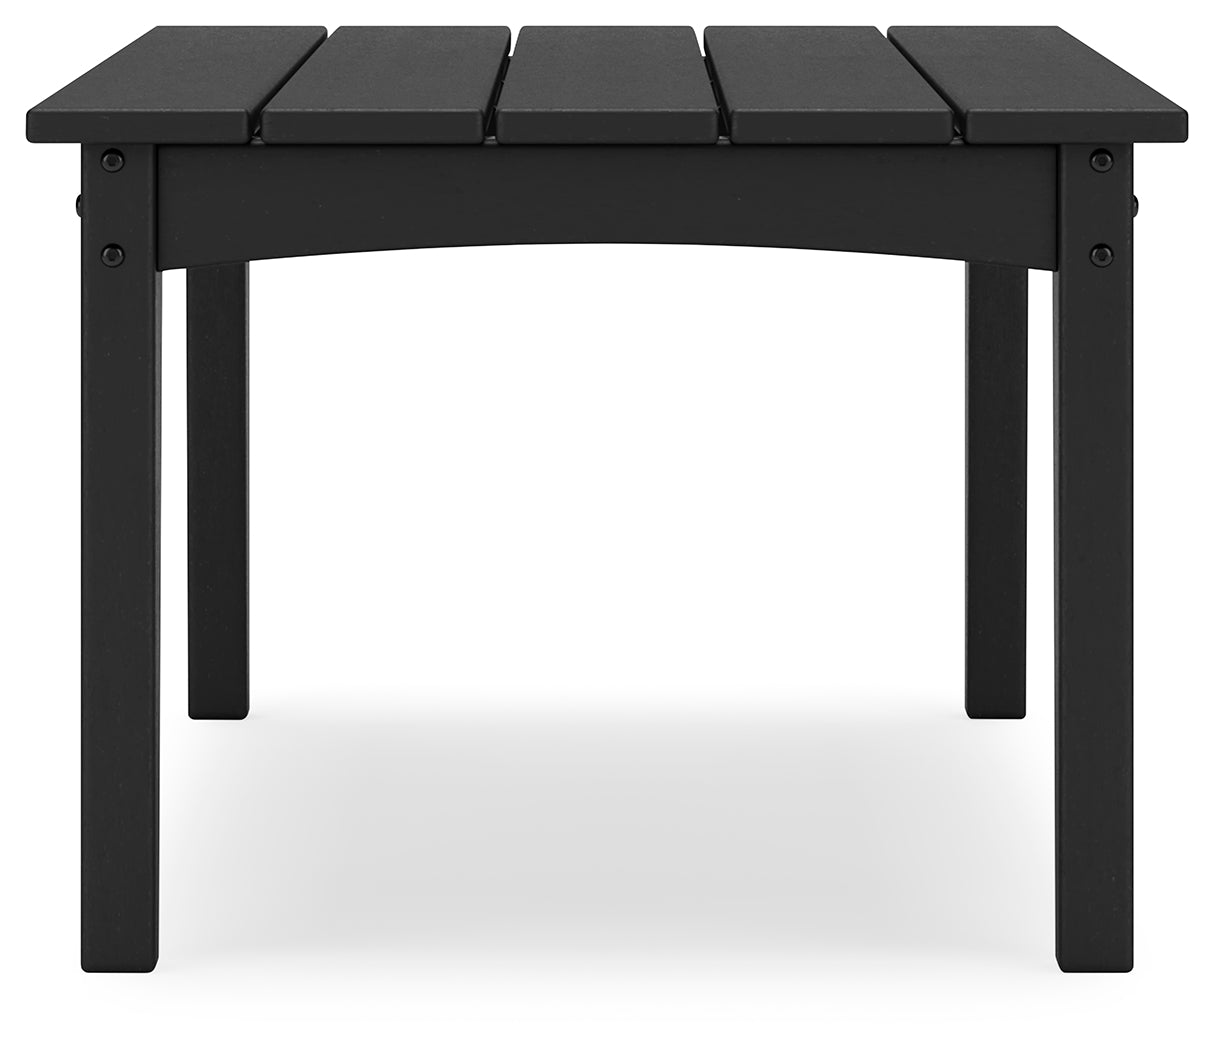 Hyland Wave Black Outdoor Coffee Table